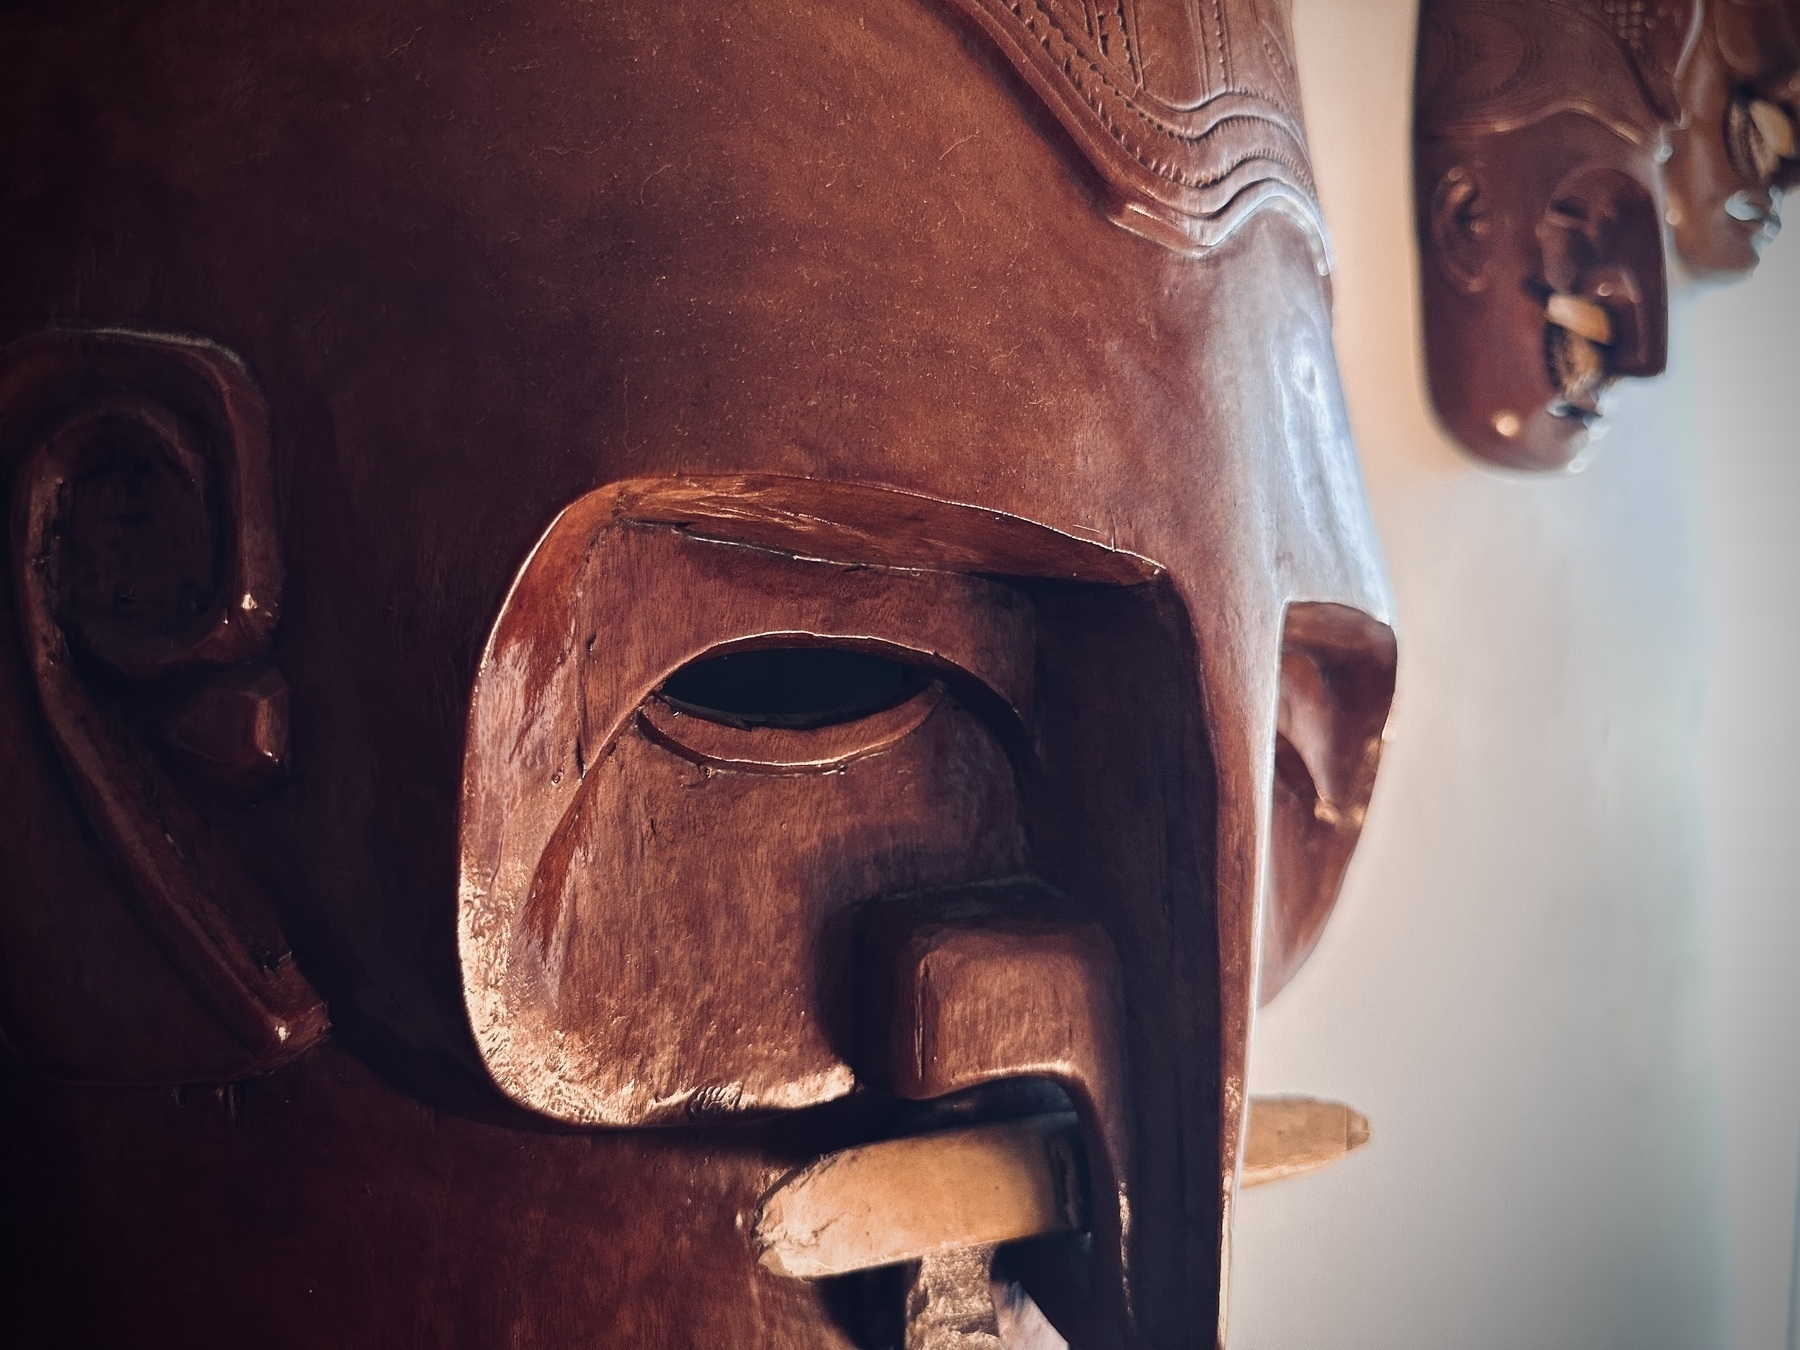 A close up of the carved eye sockets of an old wooden ceremonial mask. A bone cross piece slices through its nose, held firm by carved wooden “shells”.&10;&10;Smaller companions hang behind it, staring. 